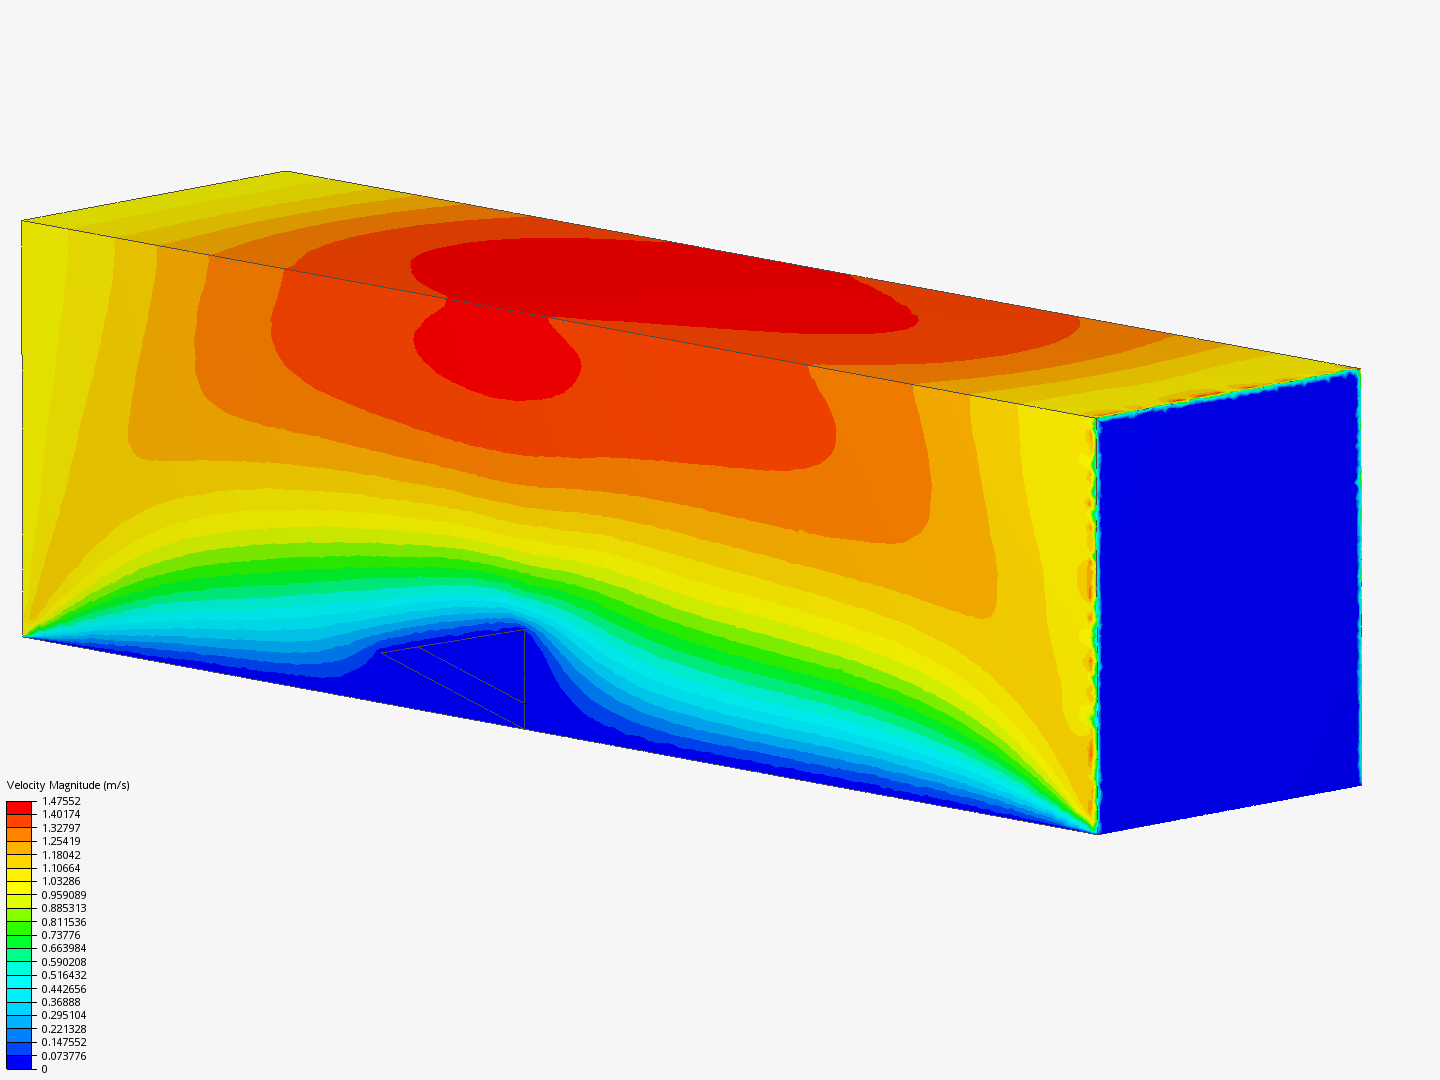 Wedge 2 CFD External Flow Case Study image